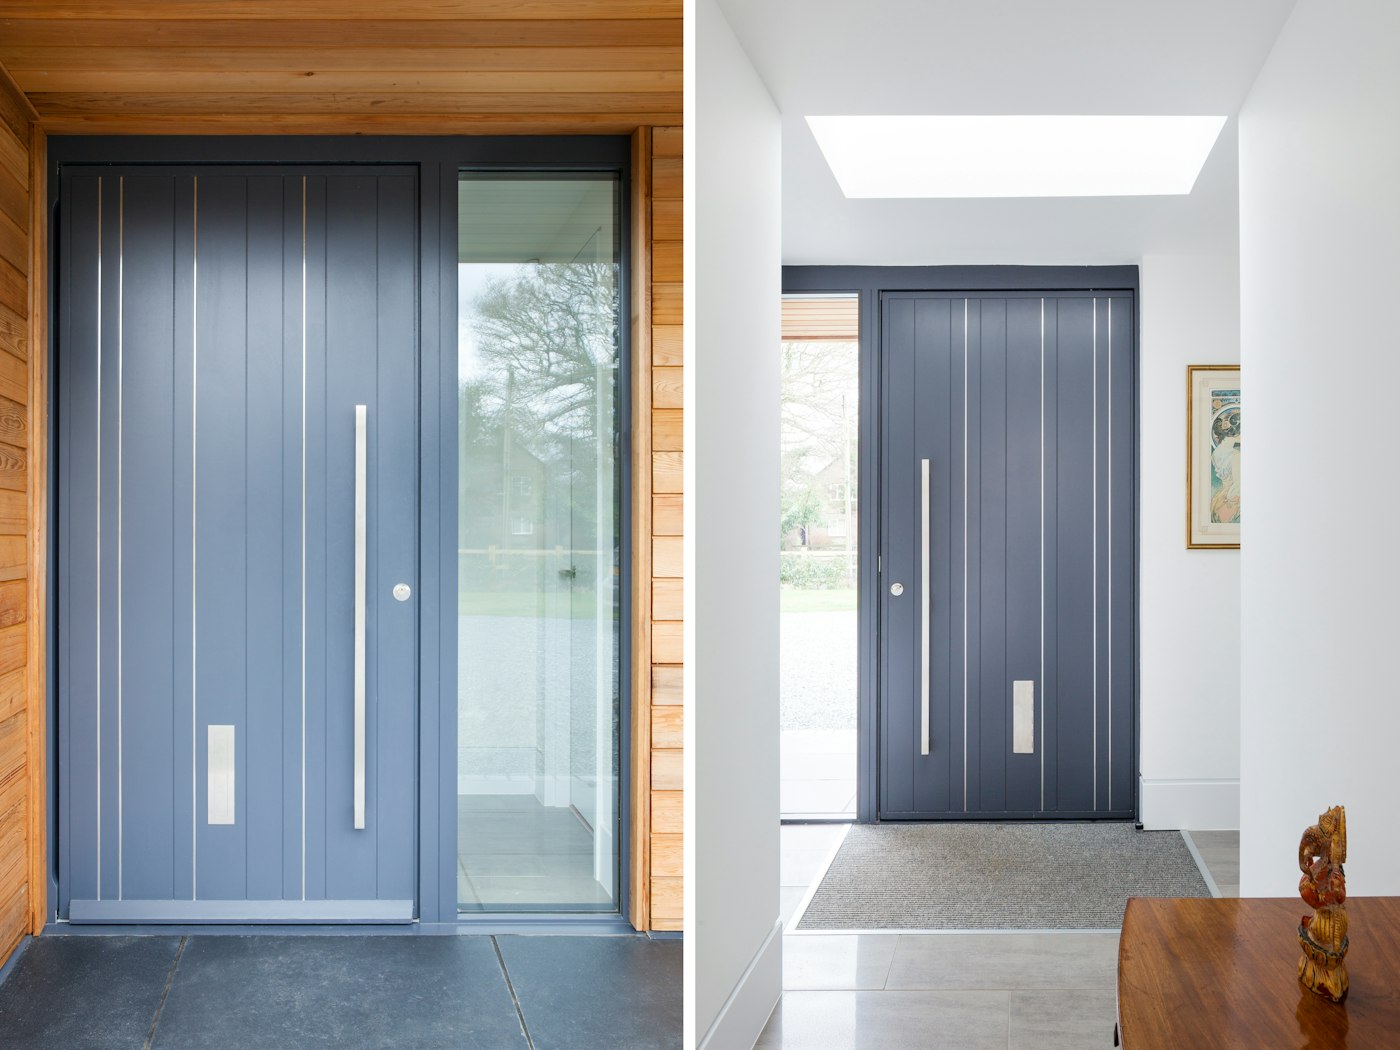 The stainless steel strips in the contemporary grey door add drama